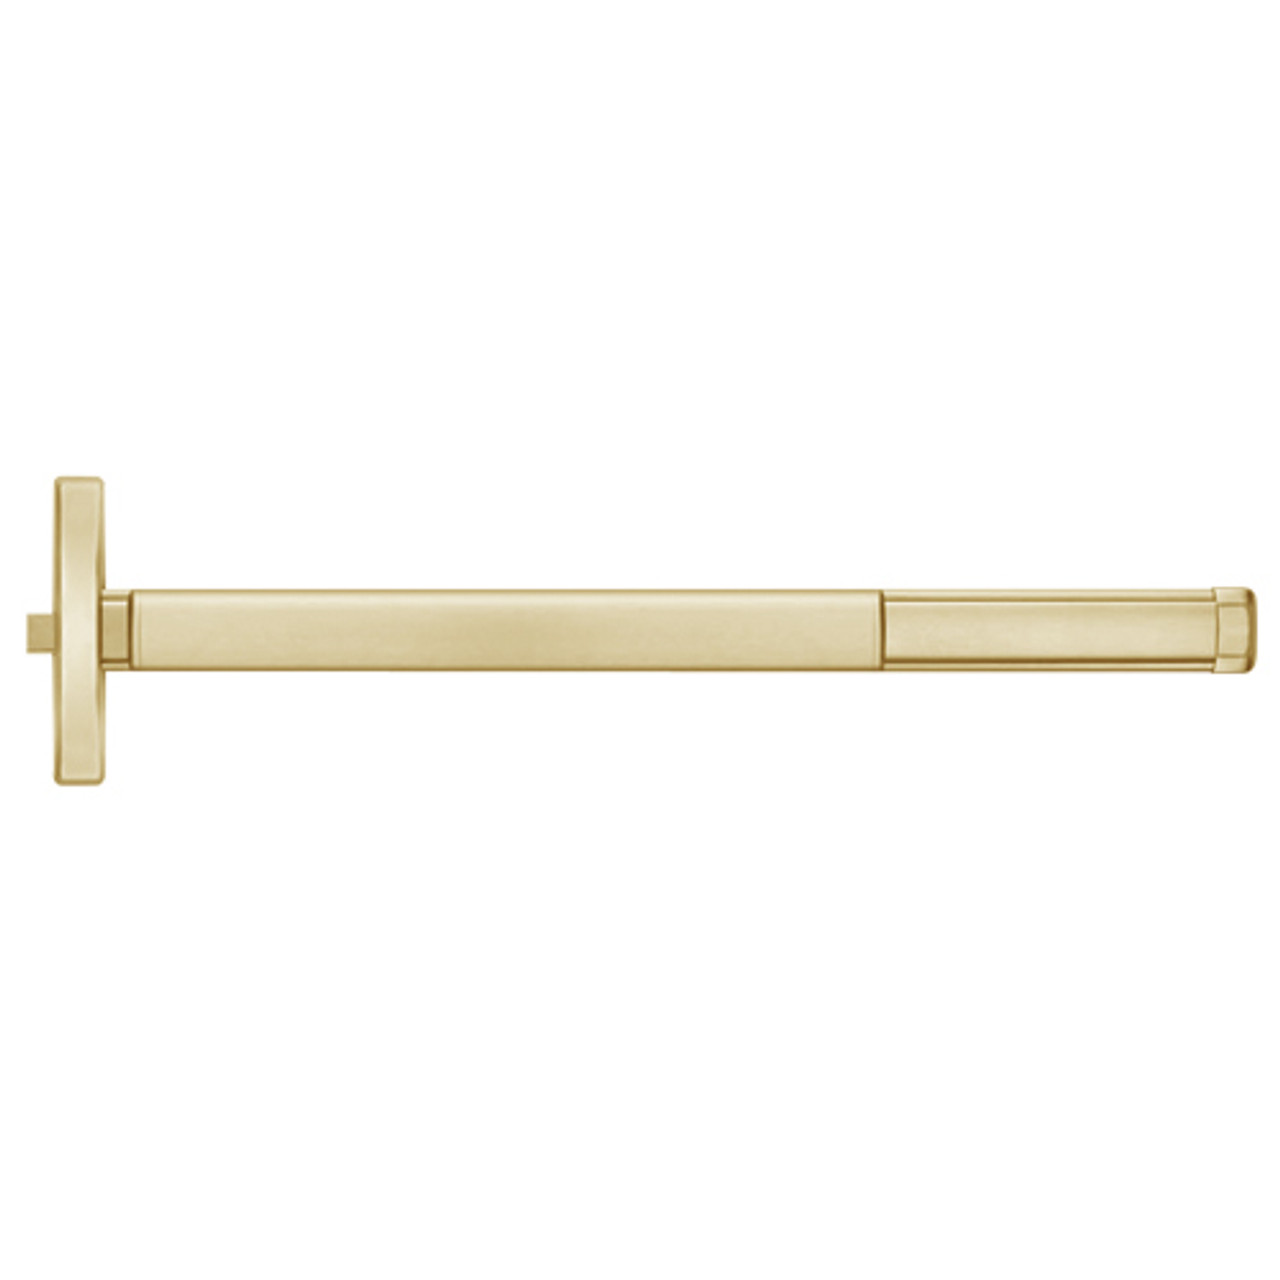 ELR2414-606-36 PHI 2400 Series Non Fire Rated Apex Rim Exit Device with Electric Latch Retraction Prepped for Lever Always Active in Satin Brass Finish